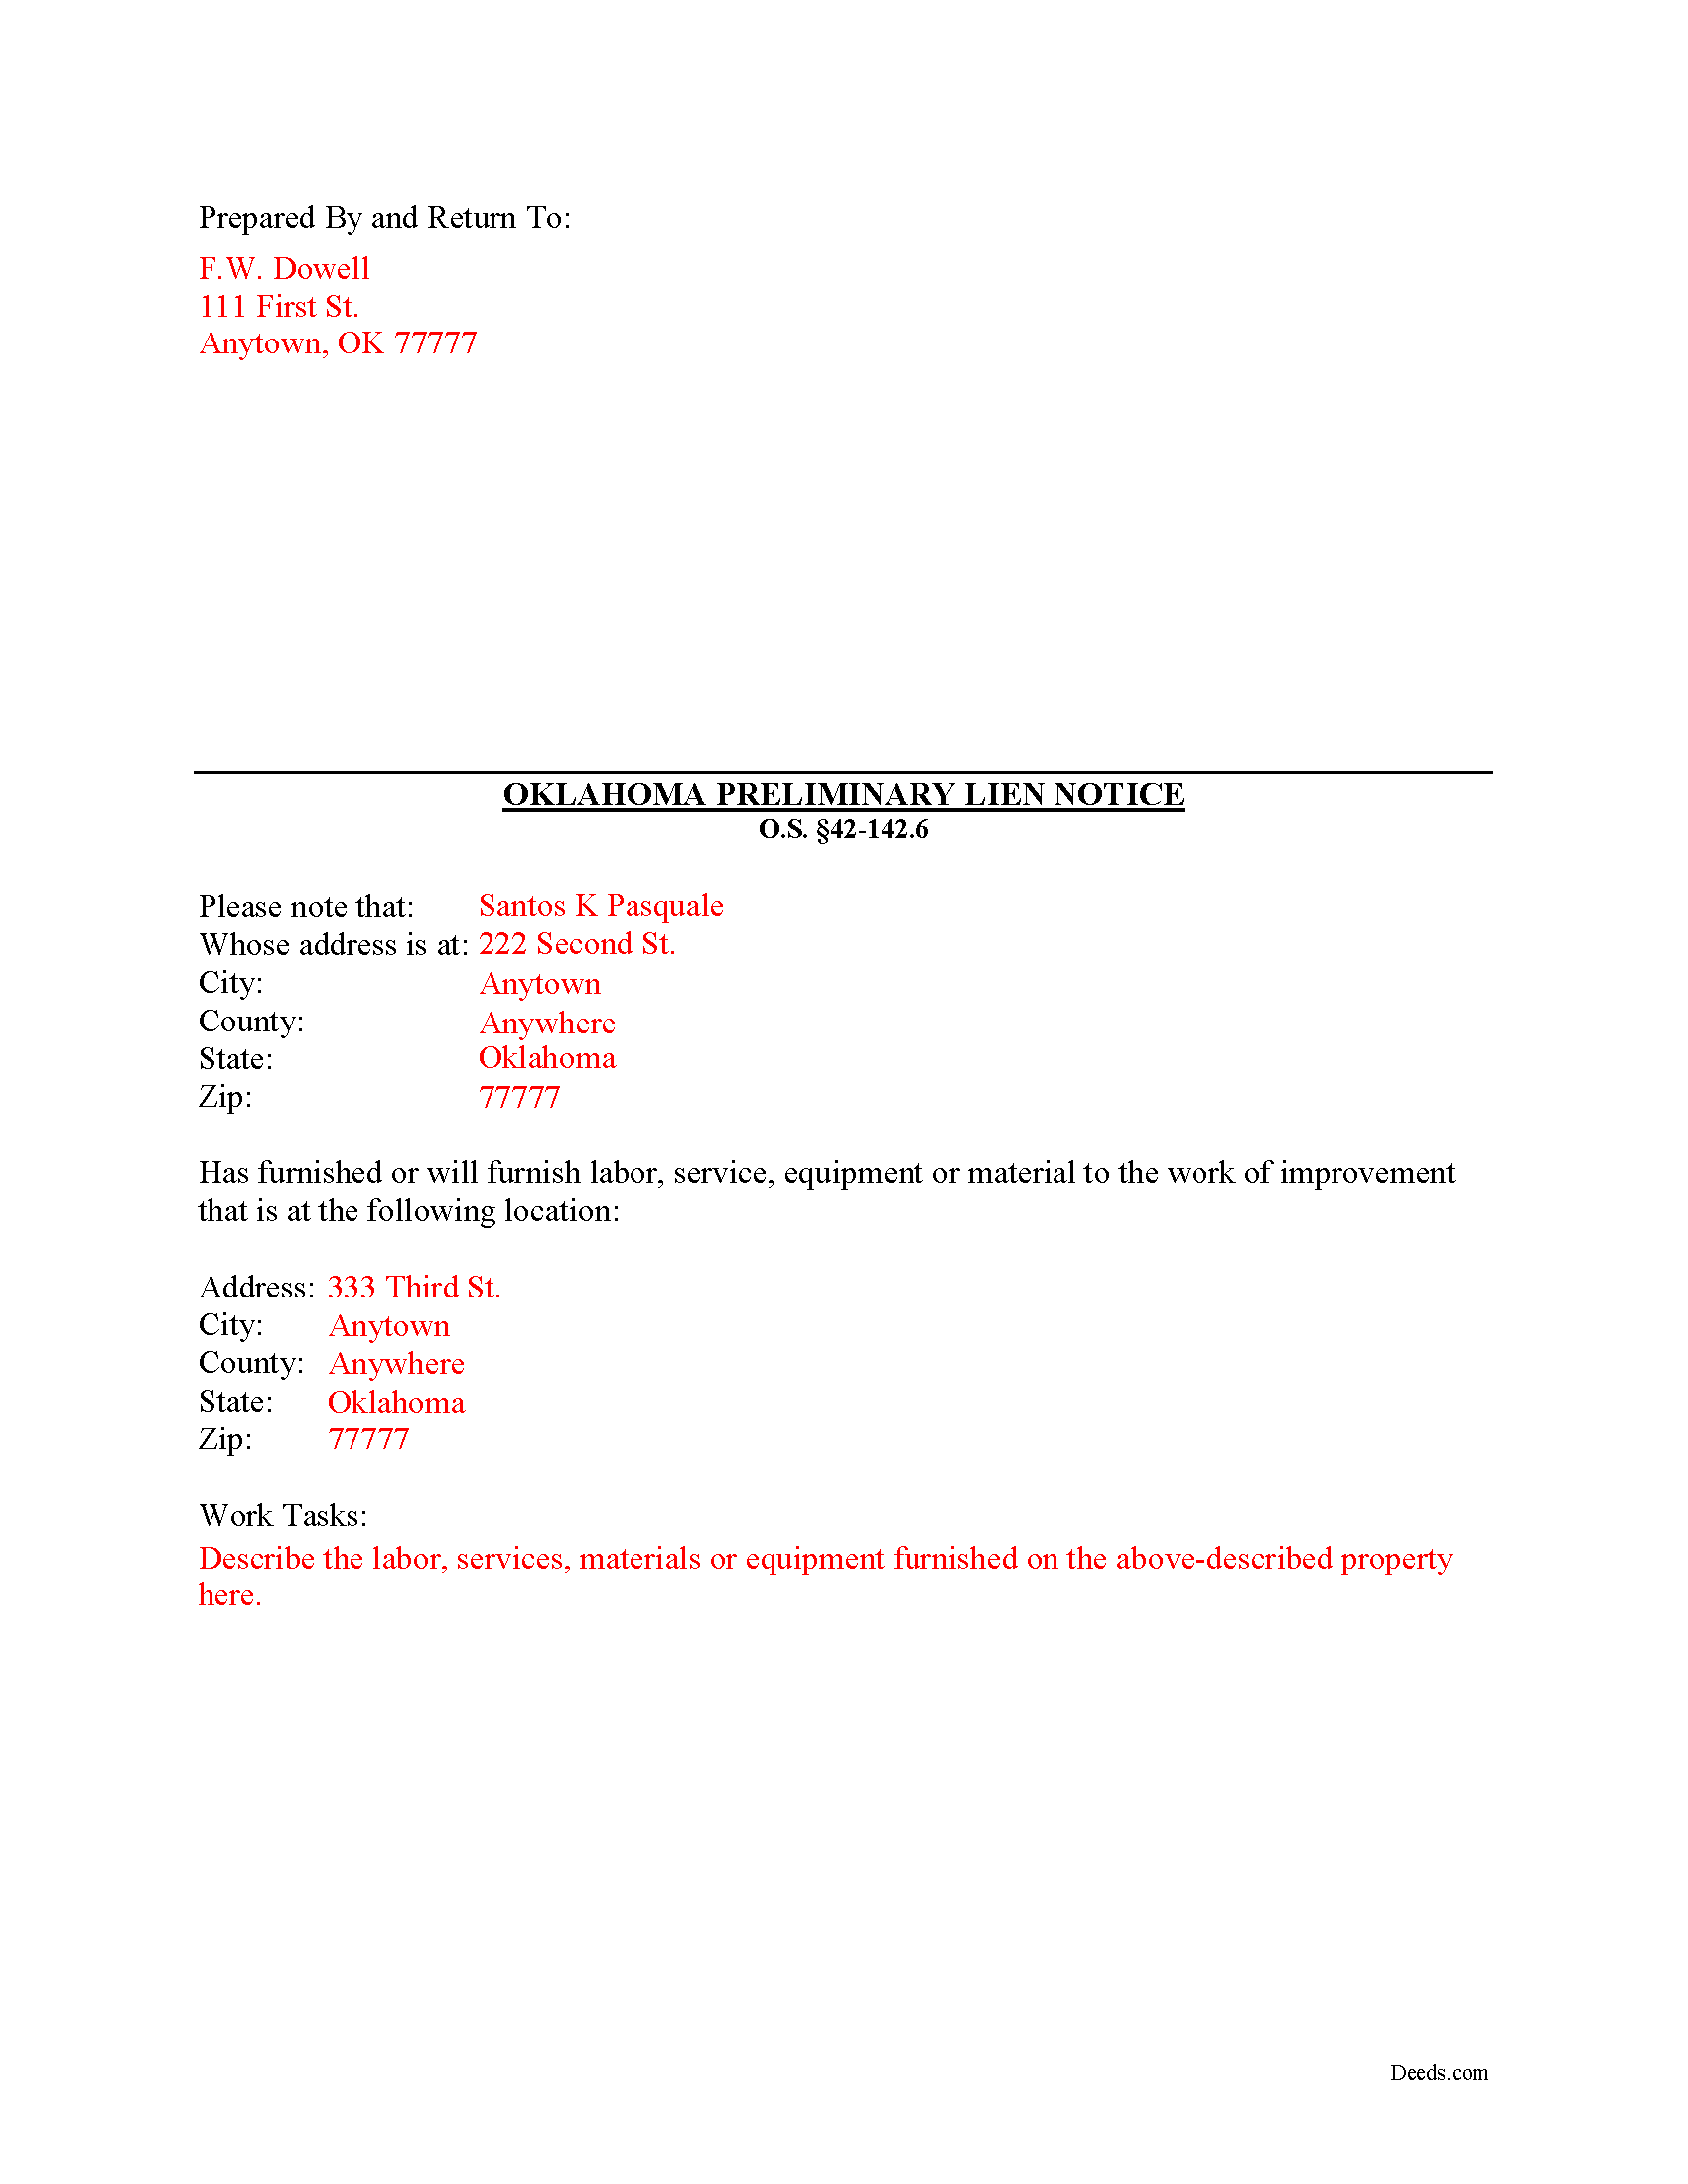 Completed Example of the Preliminary Notice Document